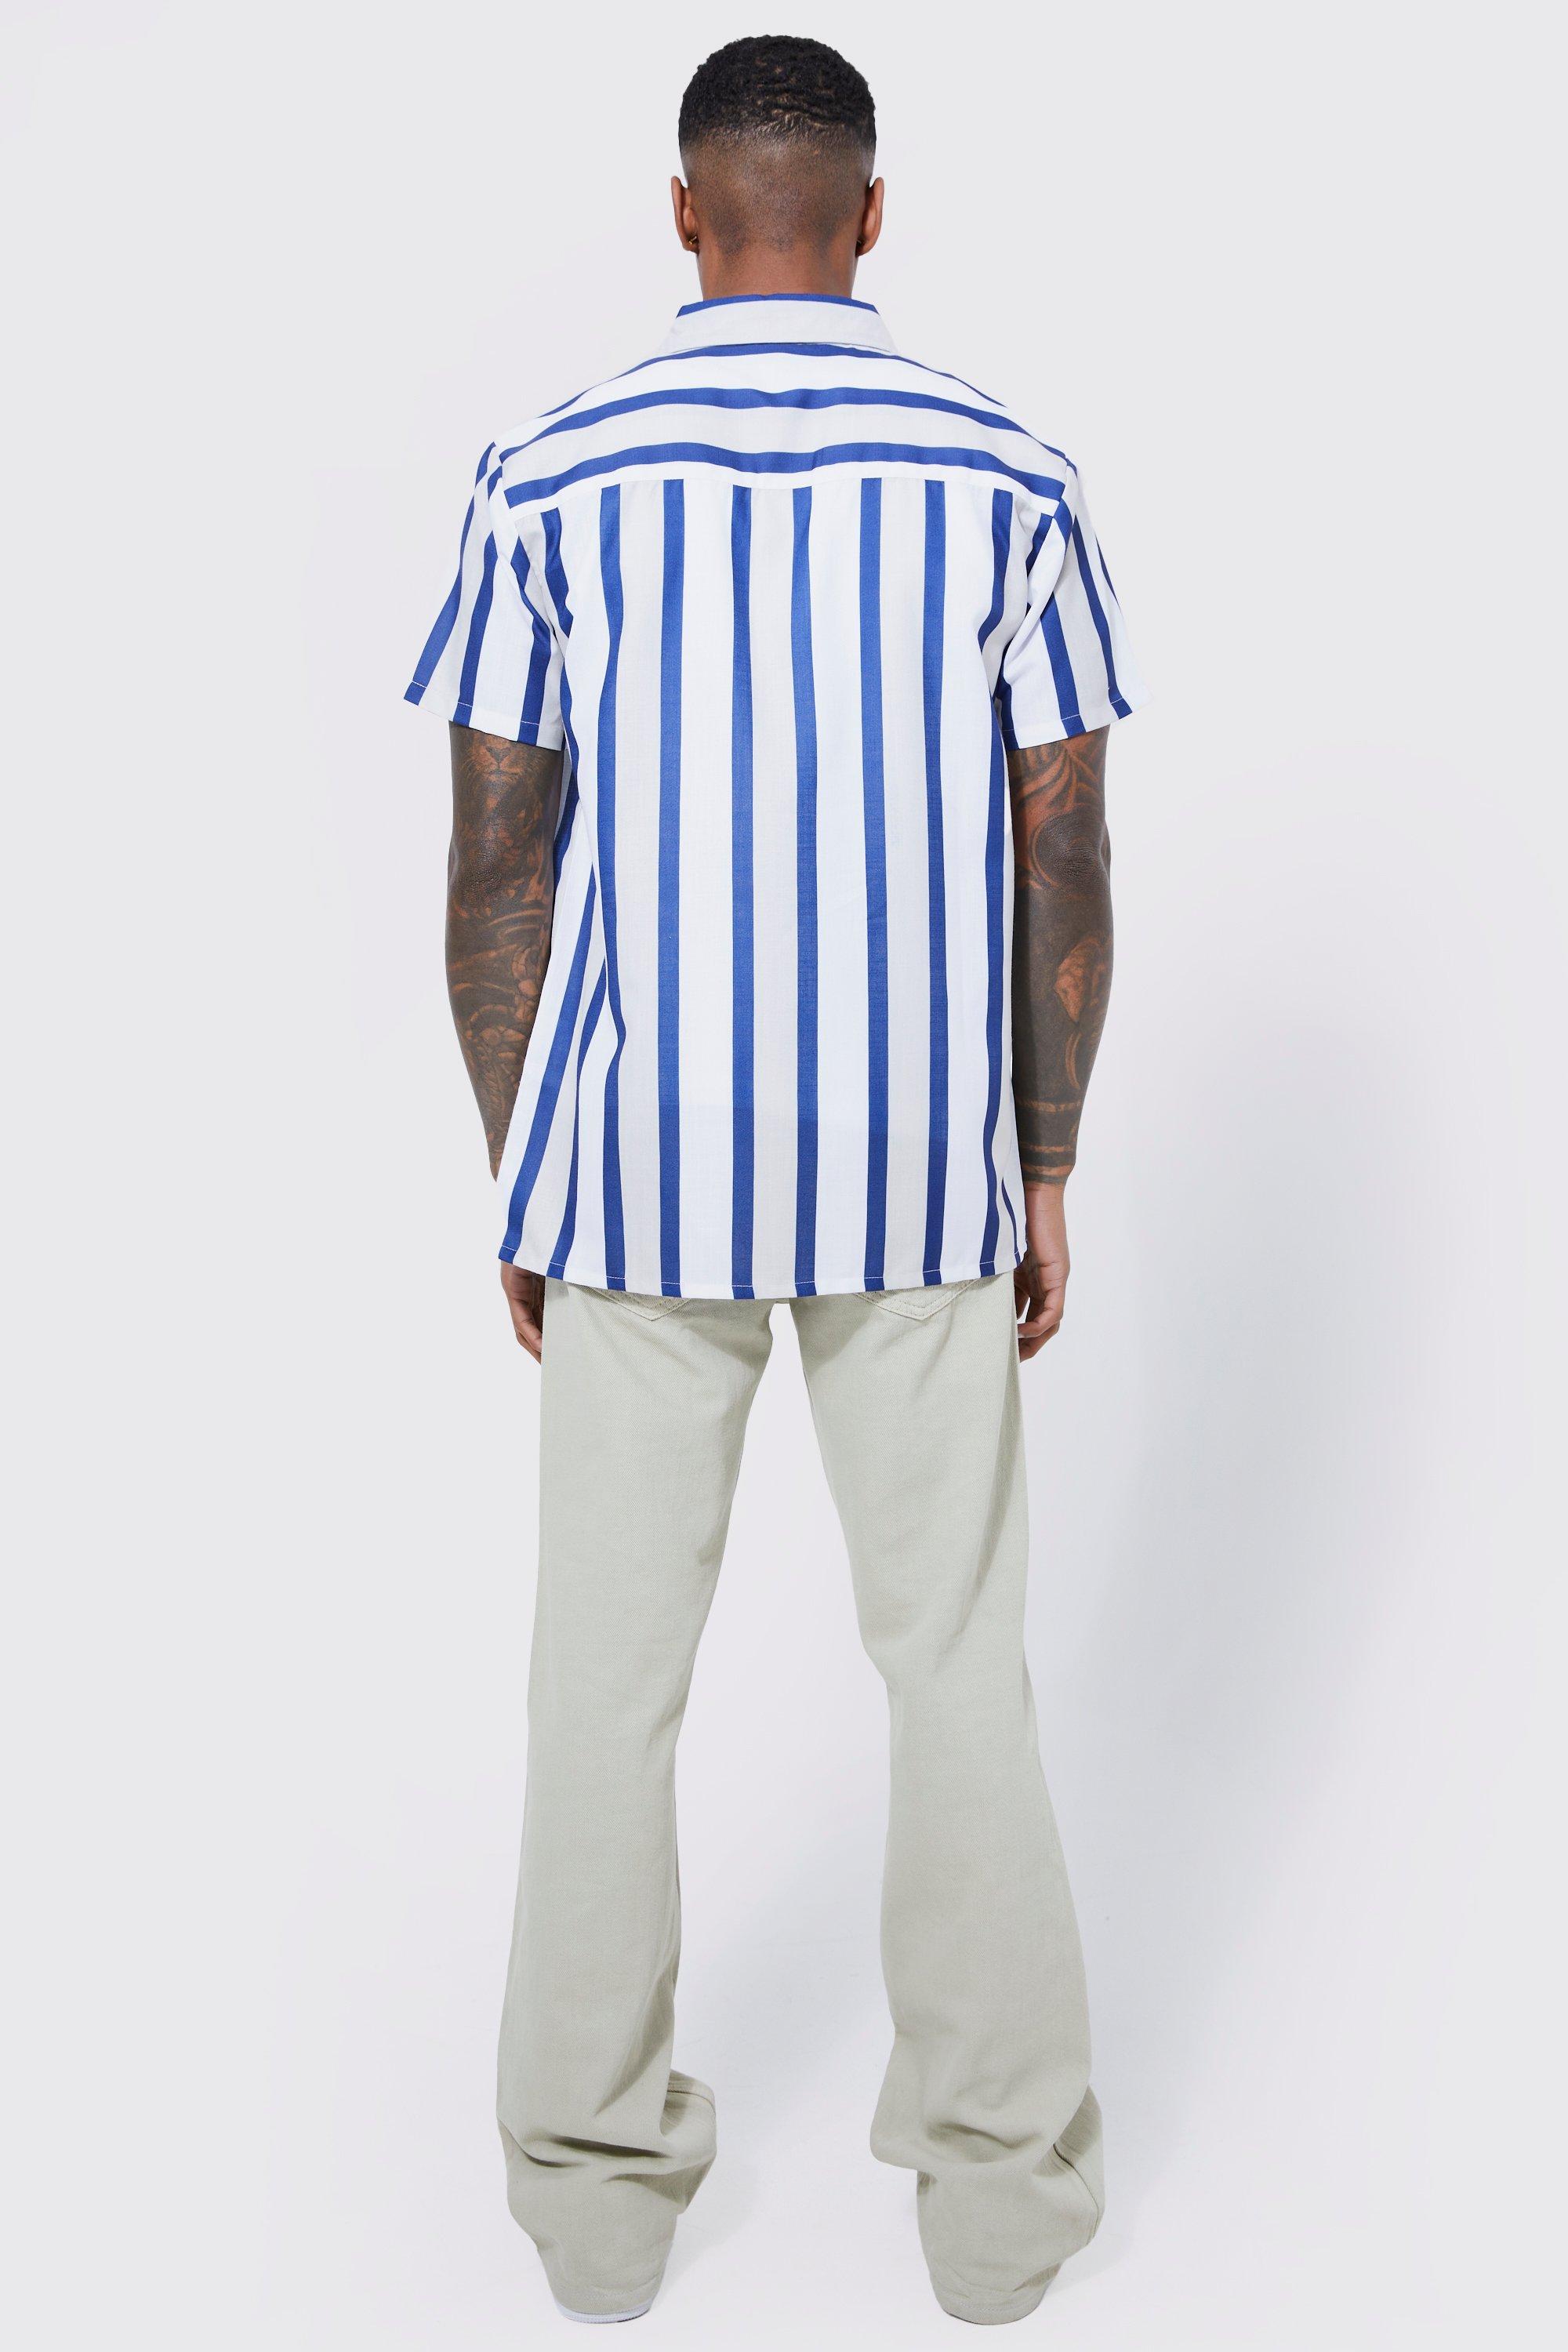 Short Sleeve Jersey with White Stripes